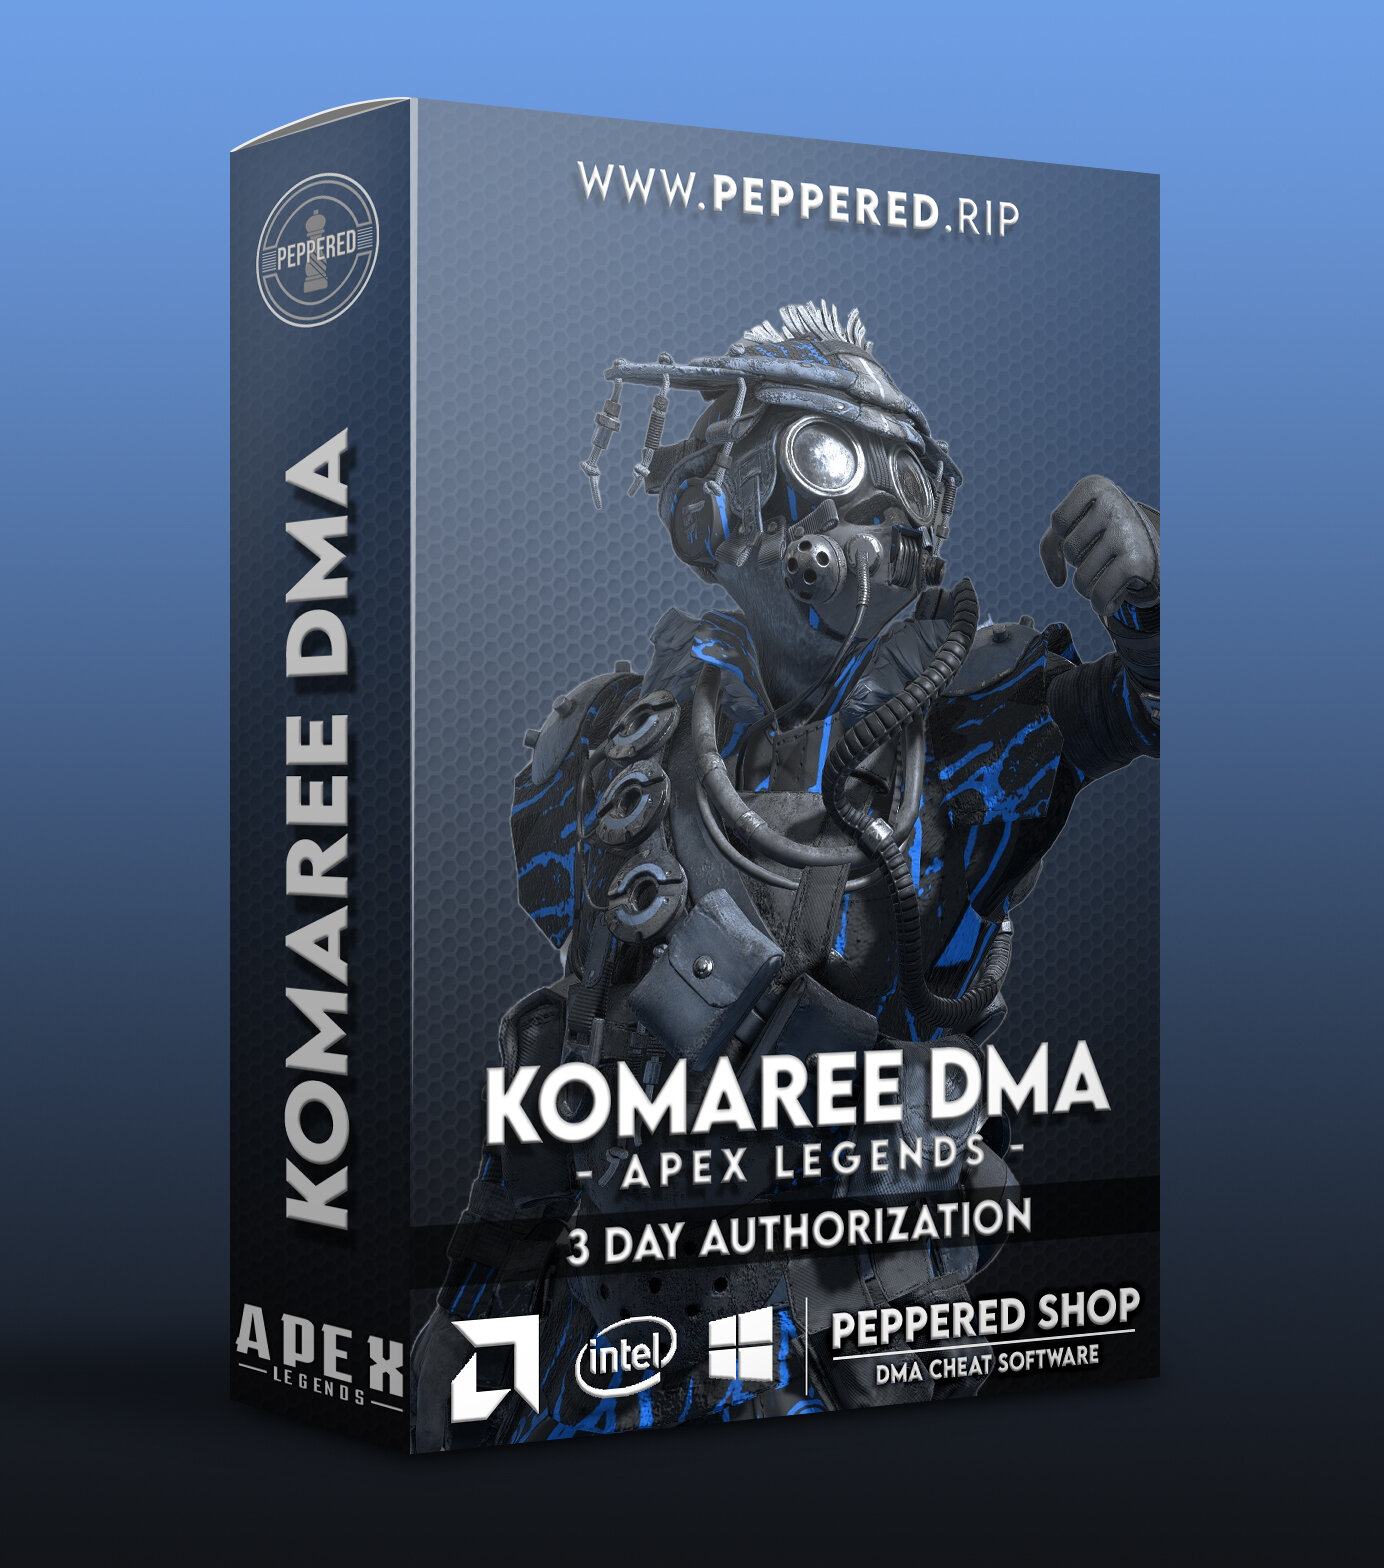 More information about "KO APEX 3 DAY"